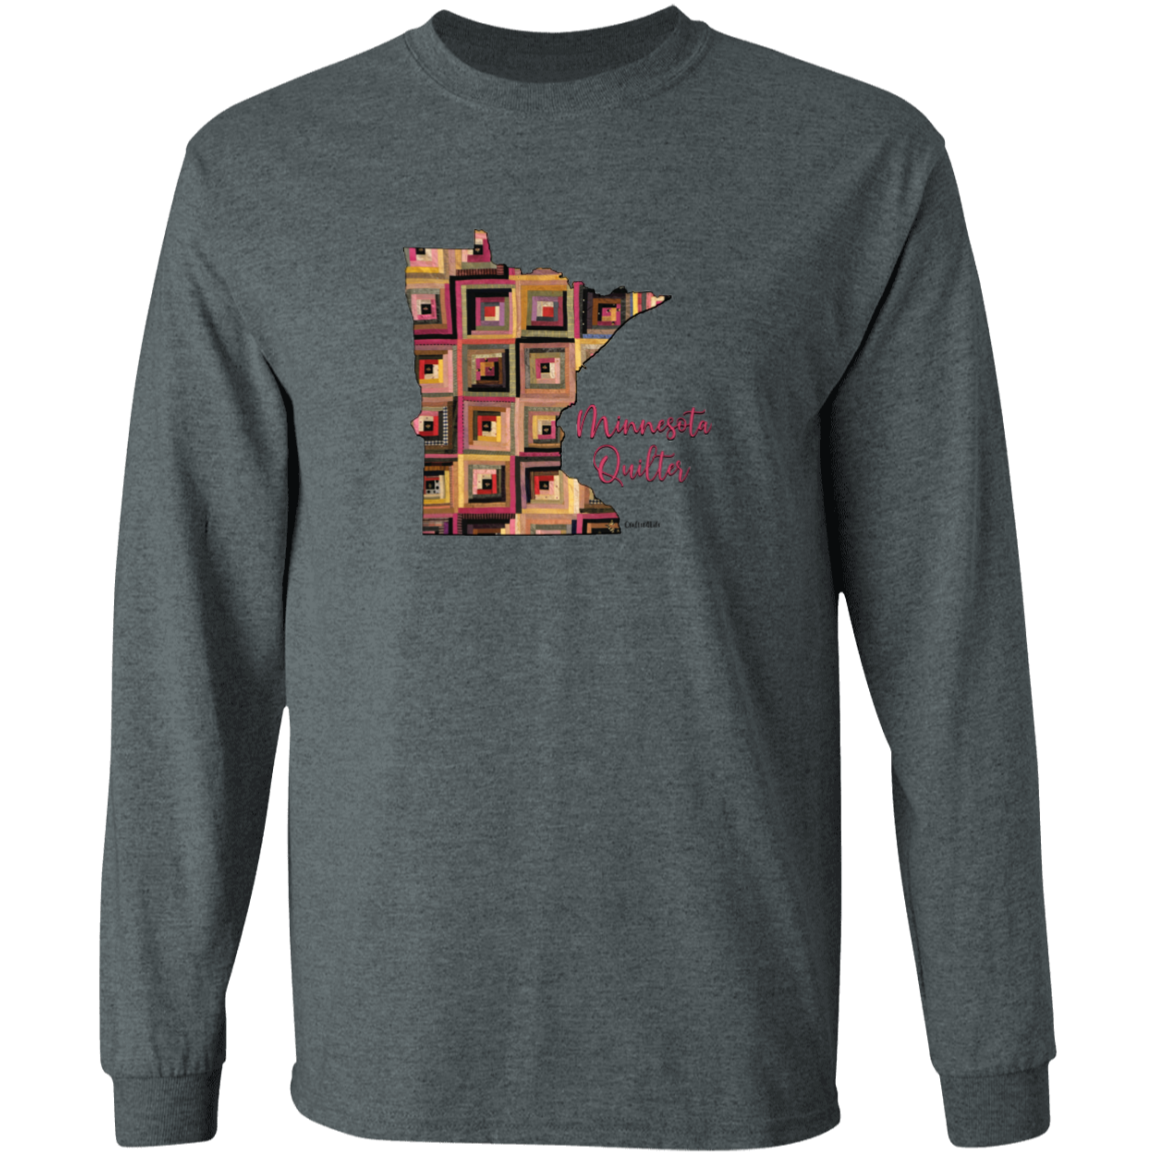 Minnesota Quilter Long Sleeve T-Shirt, Gift for Quilting Friends and Family